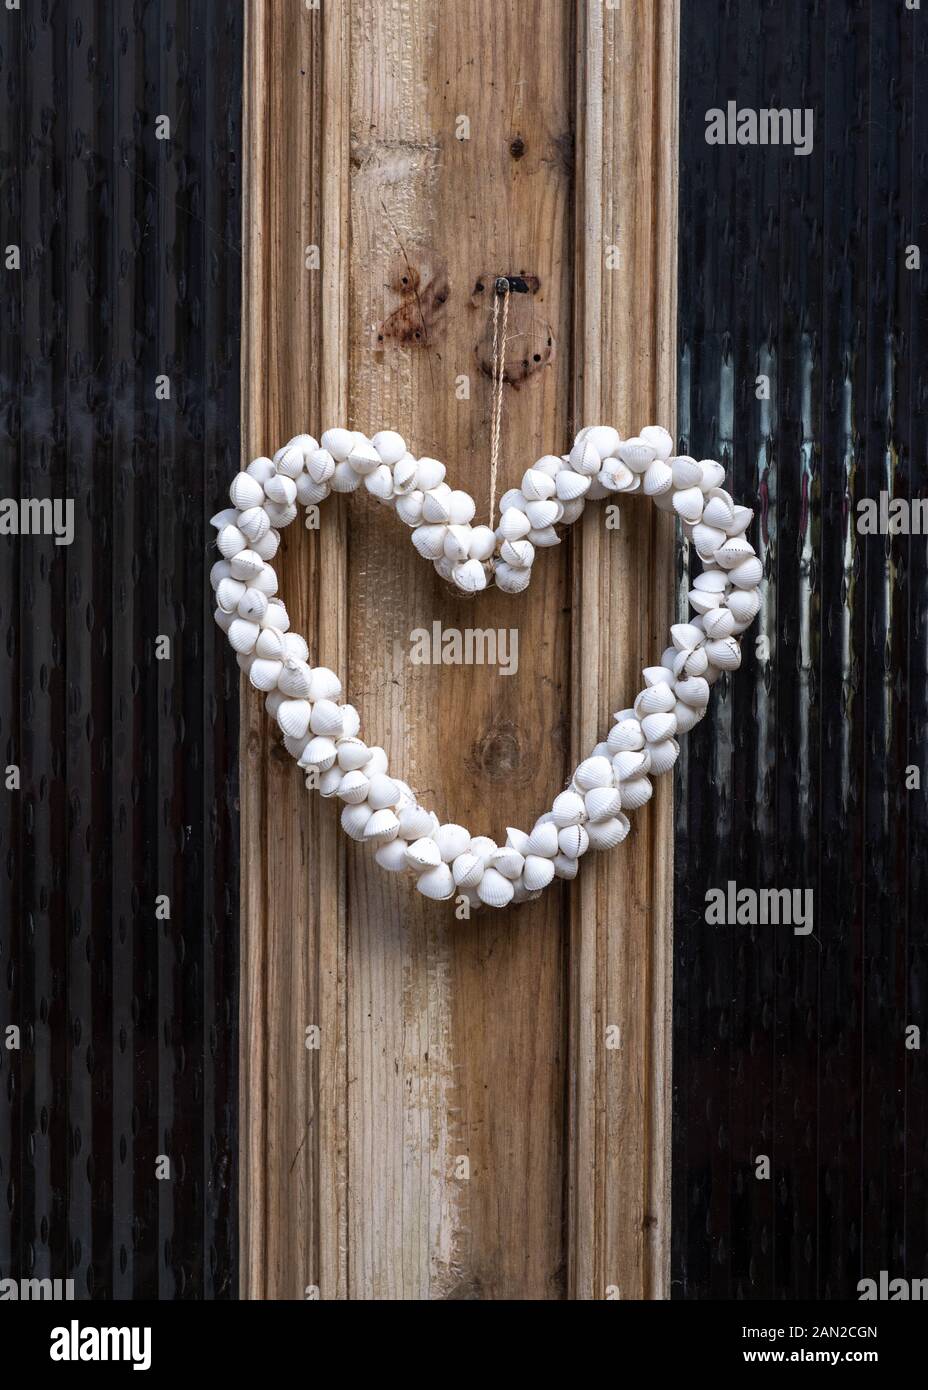 Close up of wooden doorway with white shell heart decorative detail and glass window panes Stock Photo